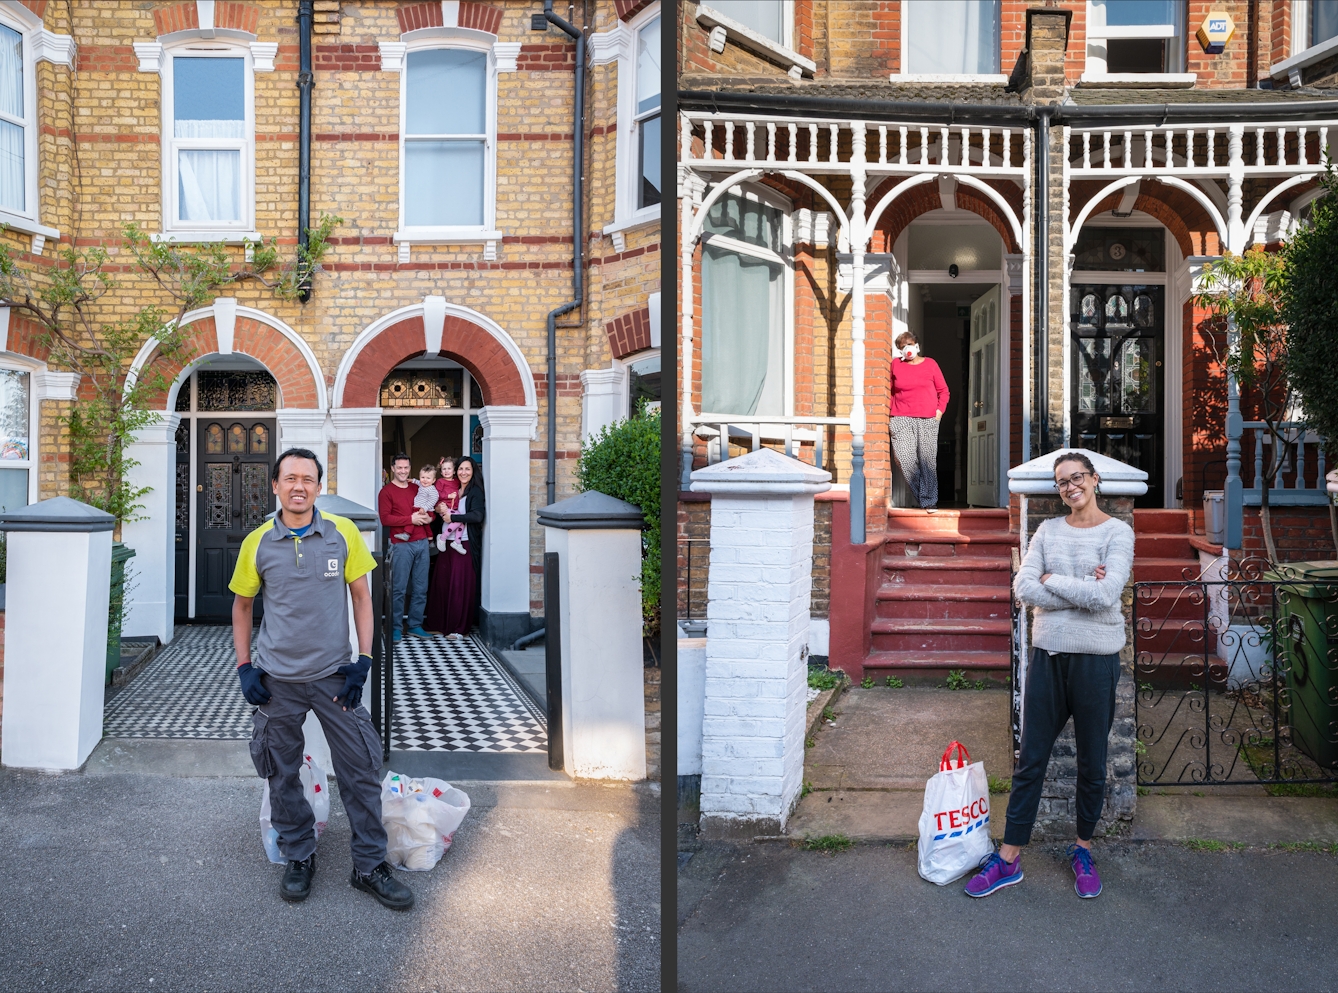 Photographic diptych both images showing the front door, front garden and front gate of a Victorian house. In the image on the left a family of a mother and father and 2 young children stand on the doorstep. A food delivery driver wearing gloves stands by the front gate with bags of shopping at his feet. In the image on the right a woman stand by the front door leaning against the wall, wearing a face mask. By the front gate a woman with her arms crossed smiles to the camera. At her feet is a bag of shopping.